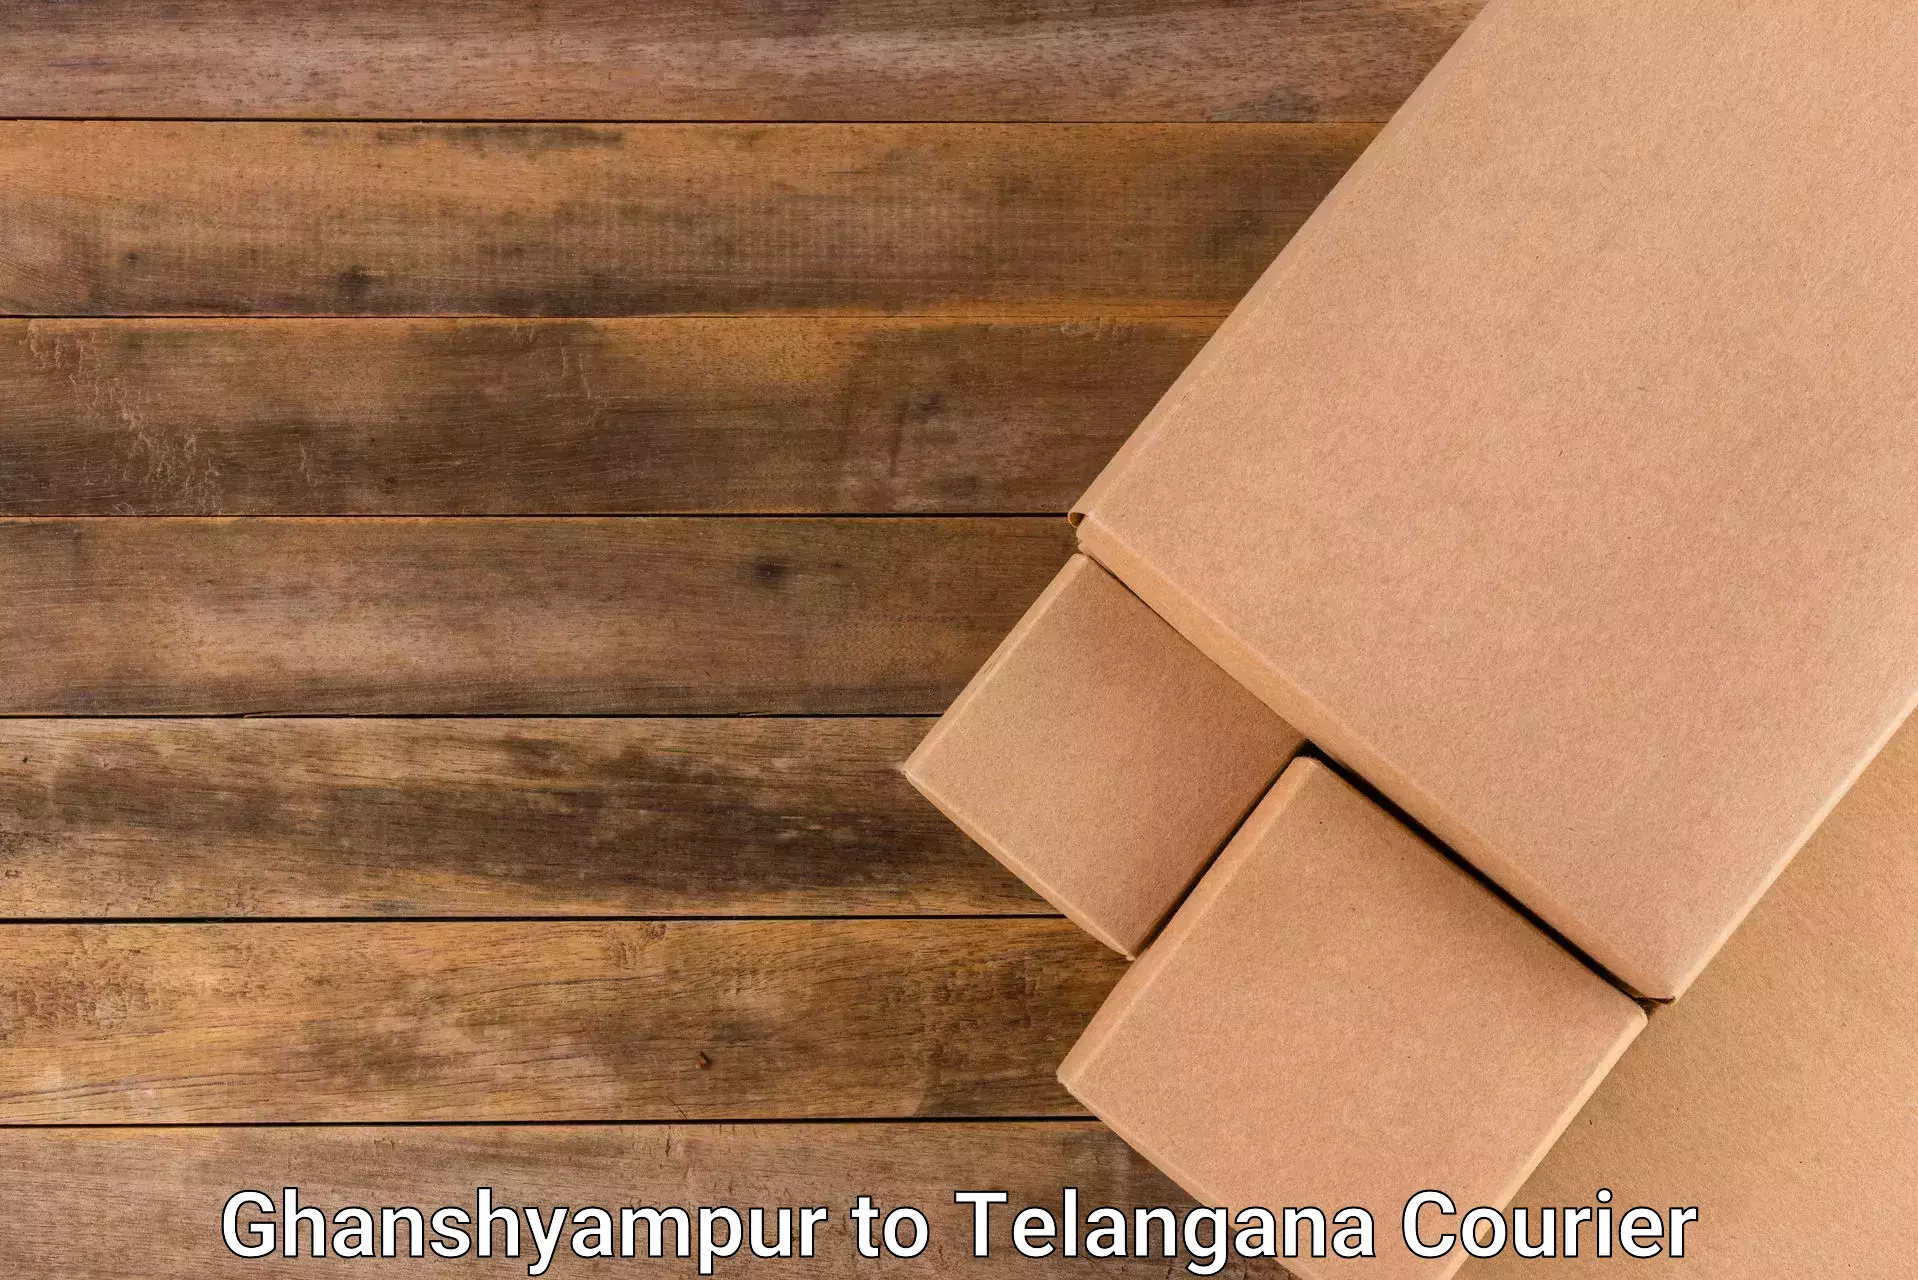 Efficient parcel service Ghanshyampur to Sathupally